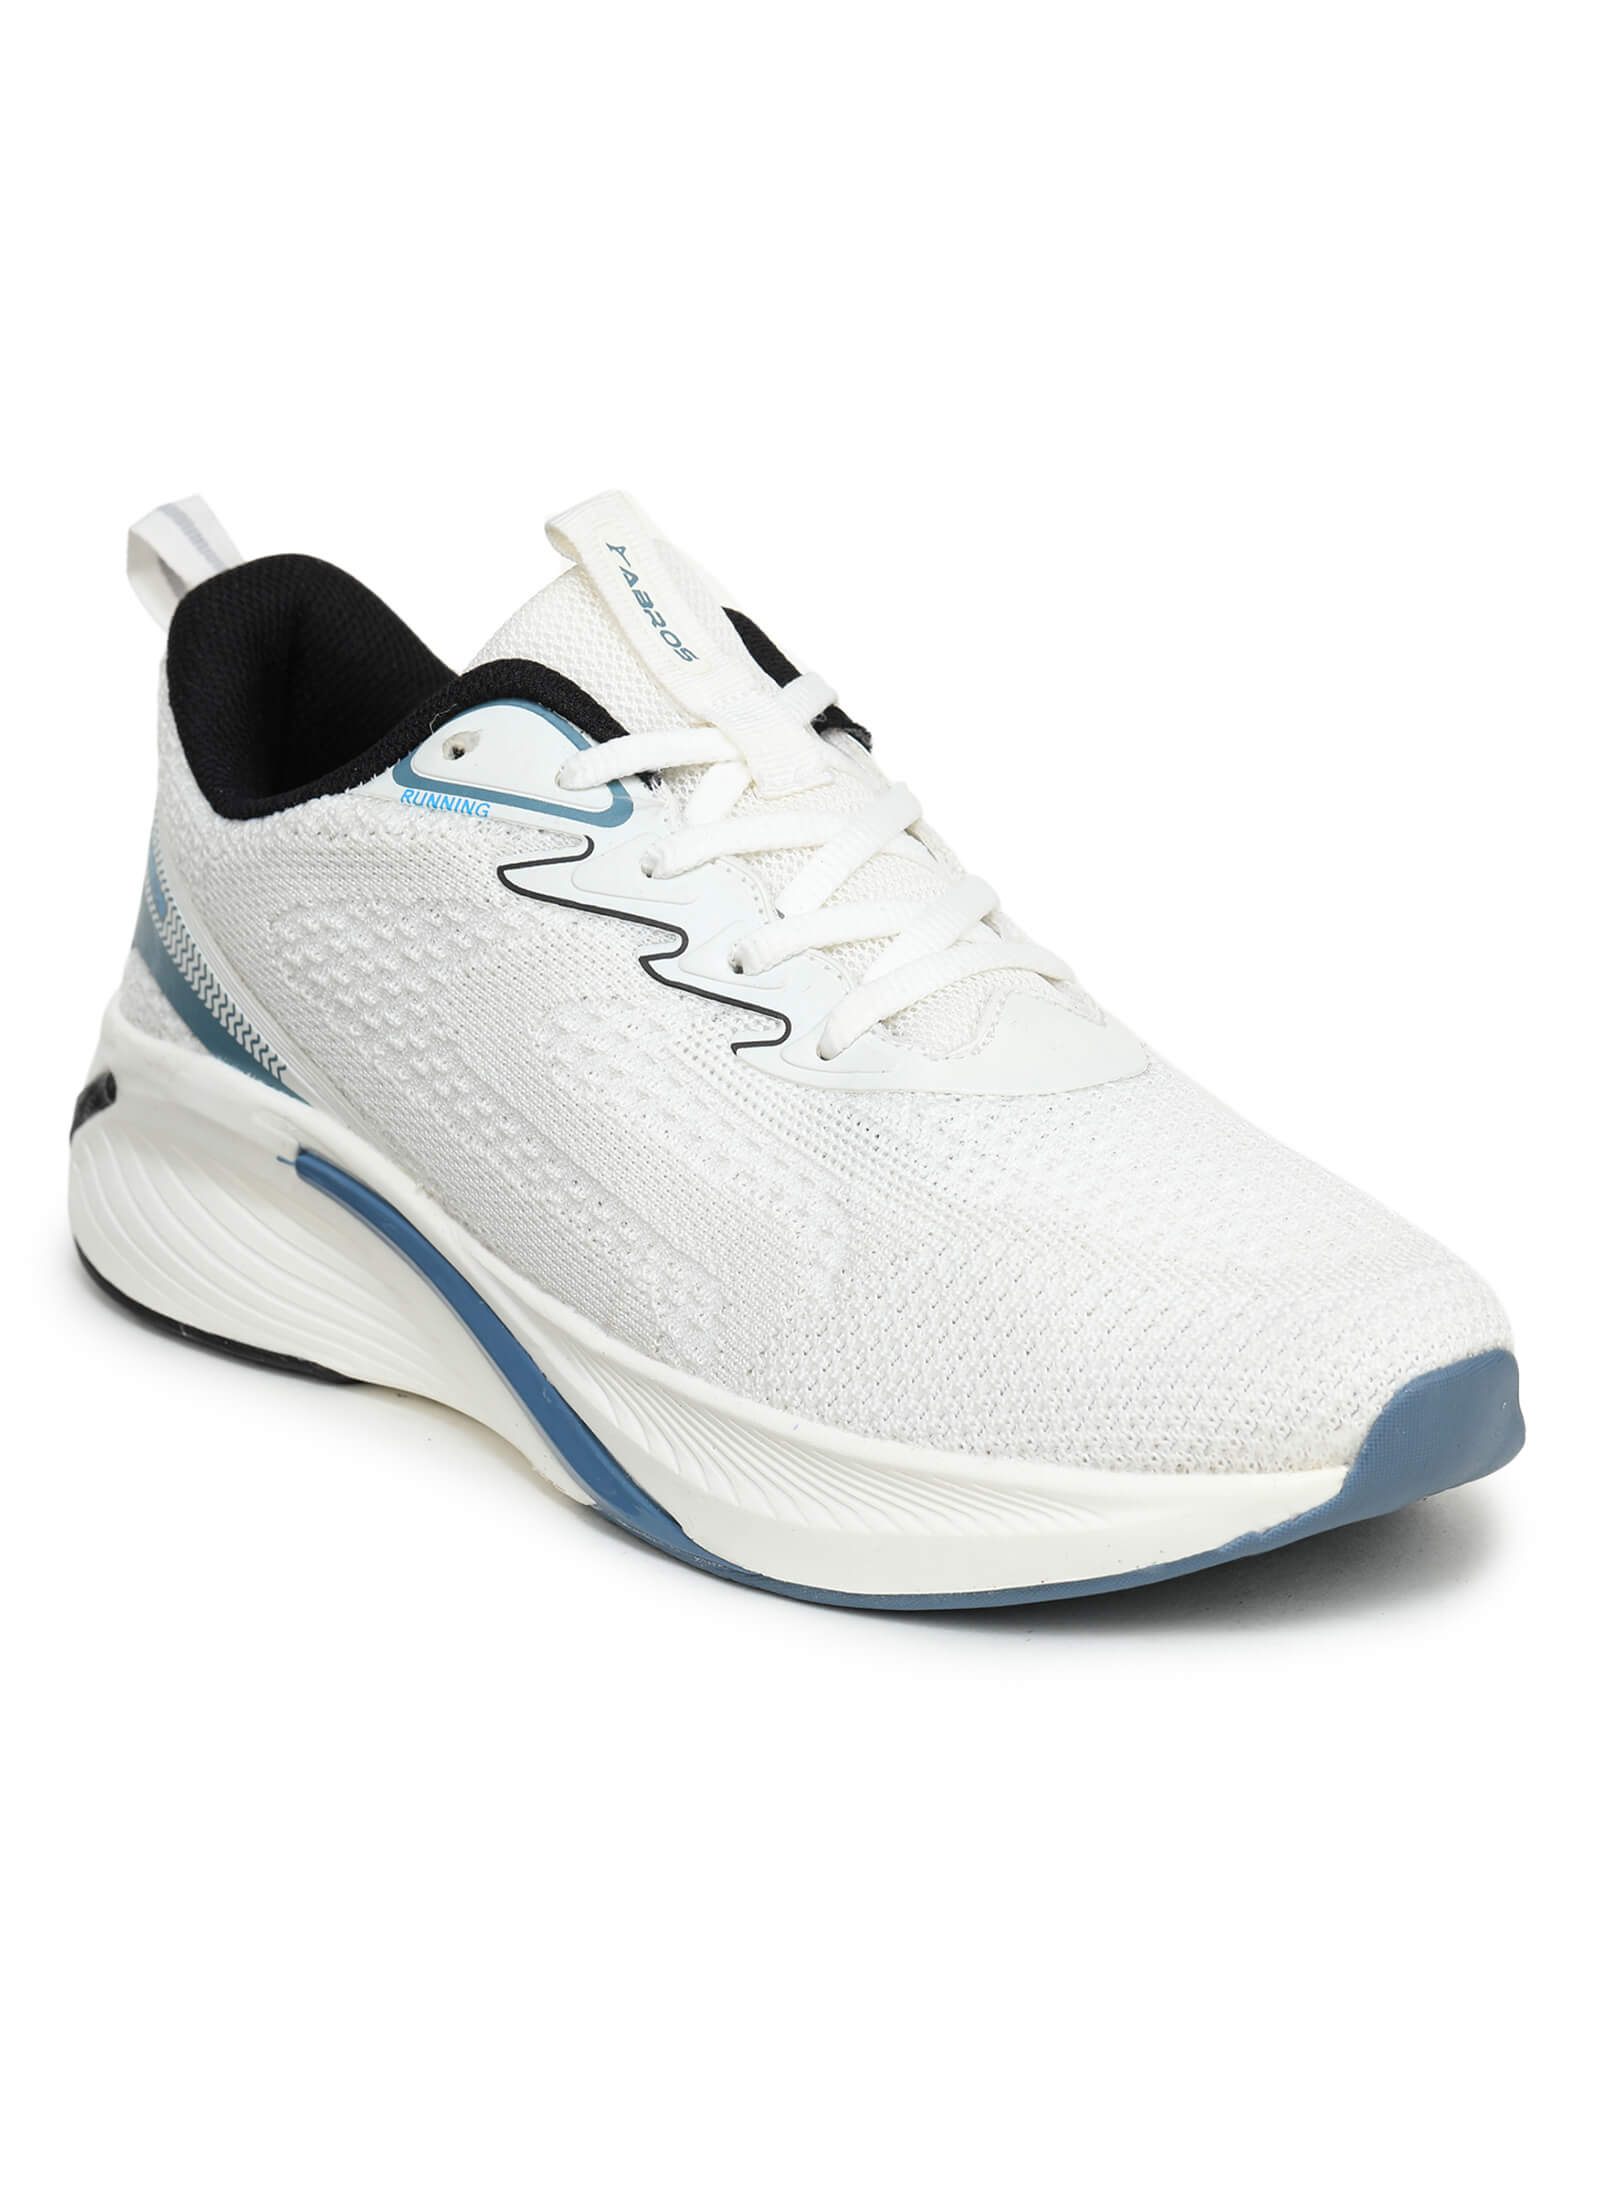 Stare-On Lightweight Anti-Skid Sports Shoes for Men